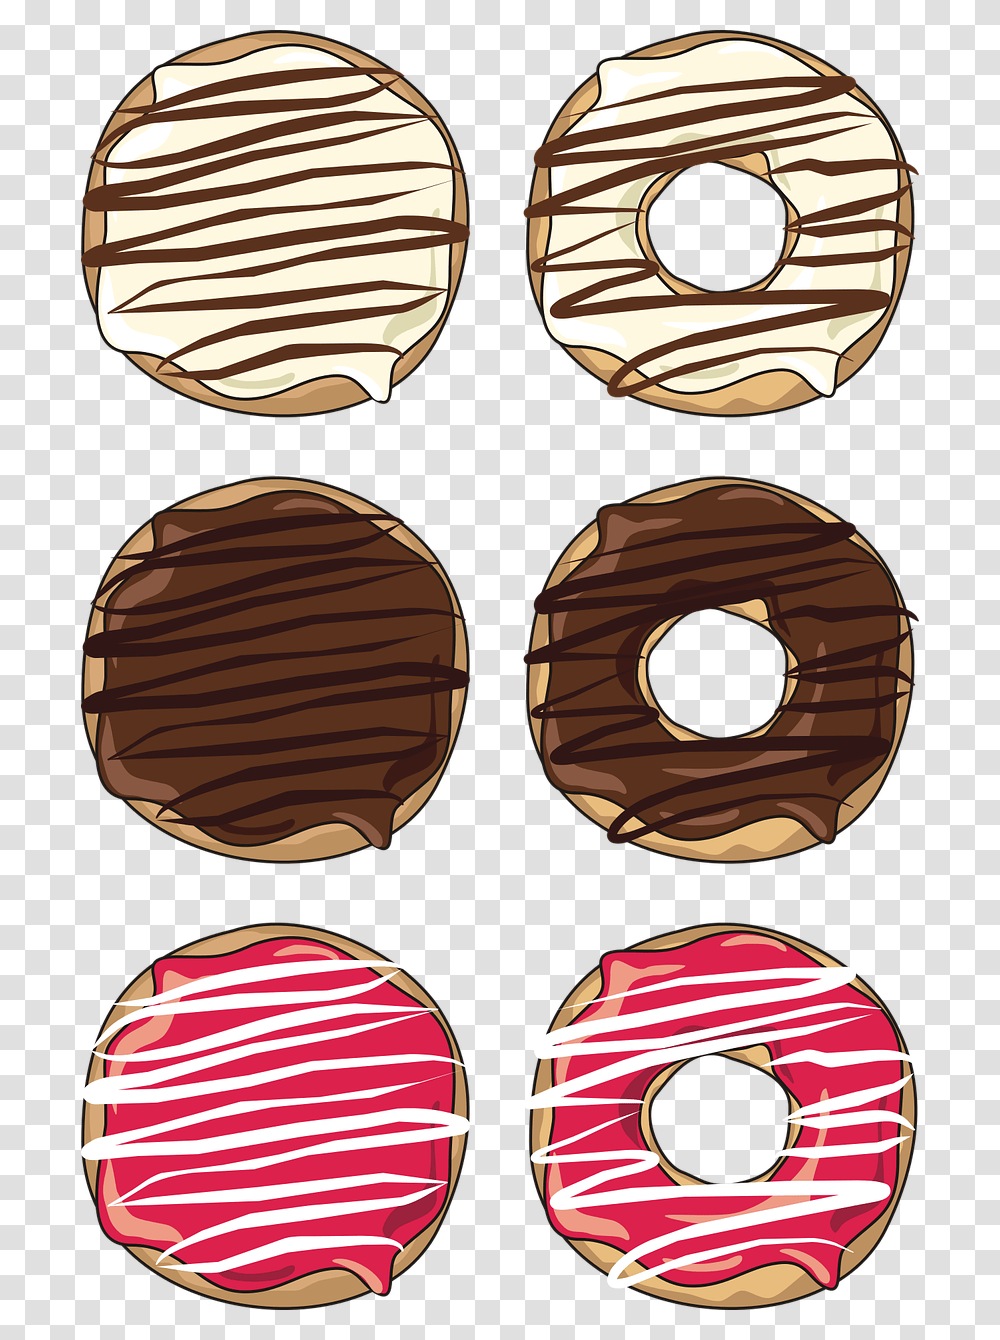 Donuts, Dessert, Food, Sweets, Pastry Transparent Png